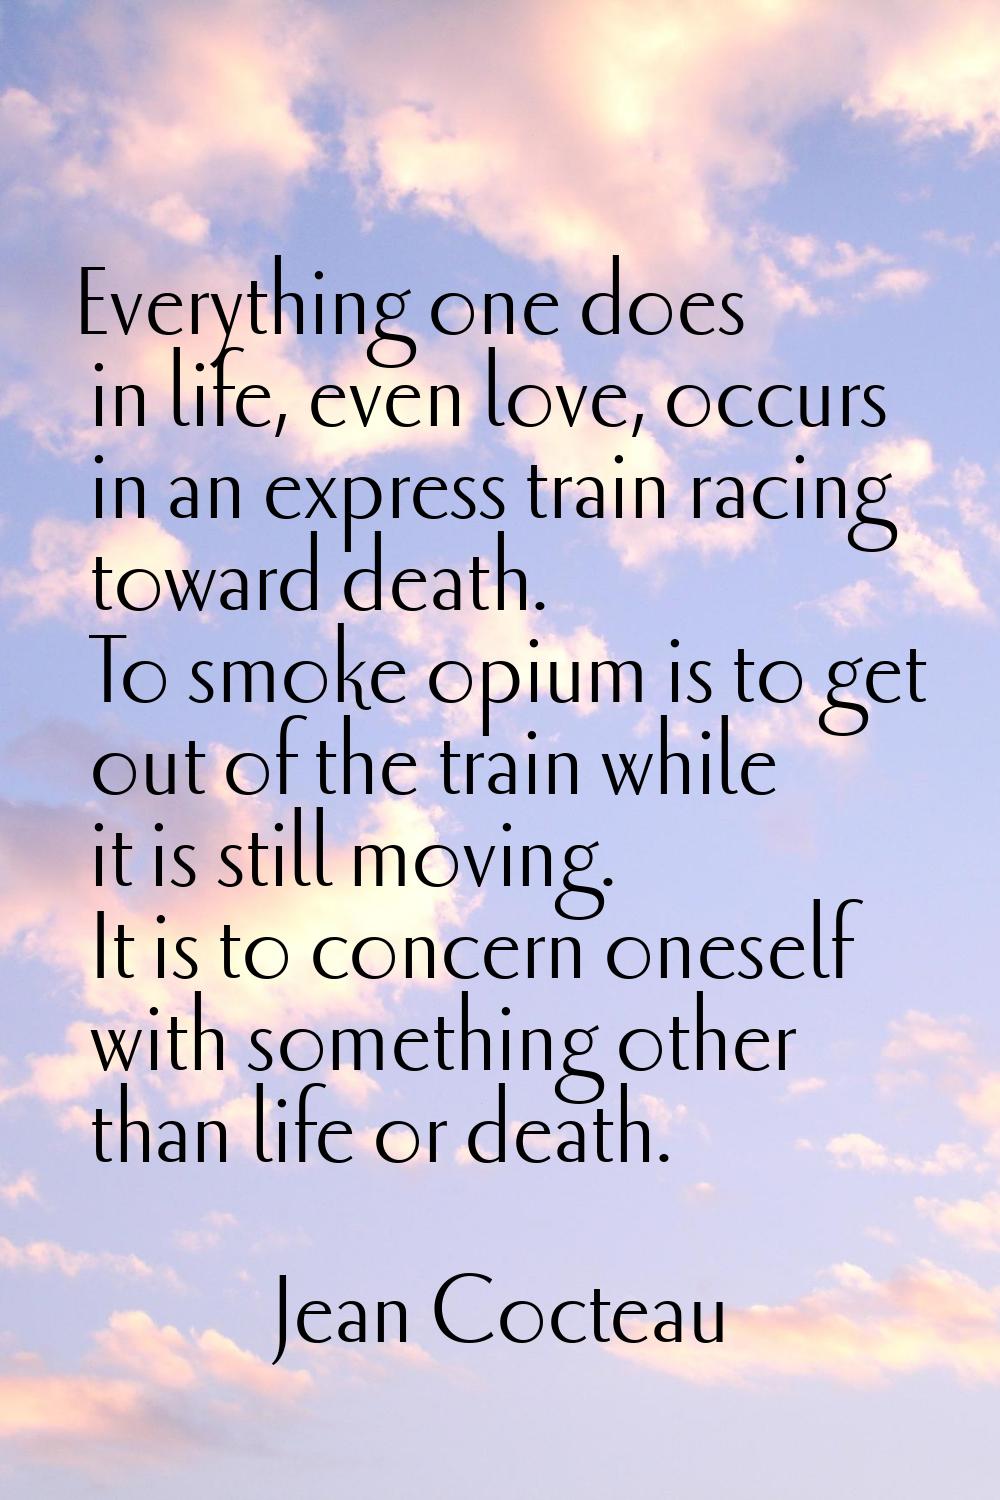 Everything one does in life, even love, occurs in an express train racing toward death. To smoke op